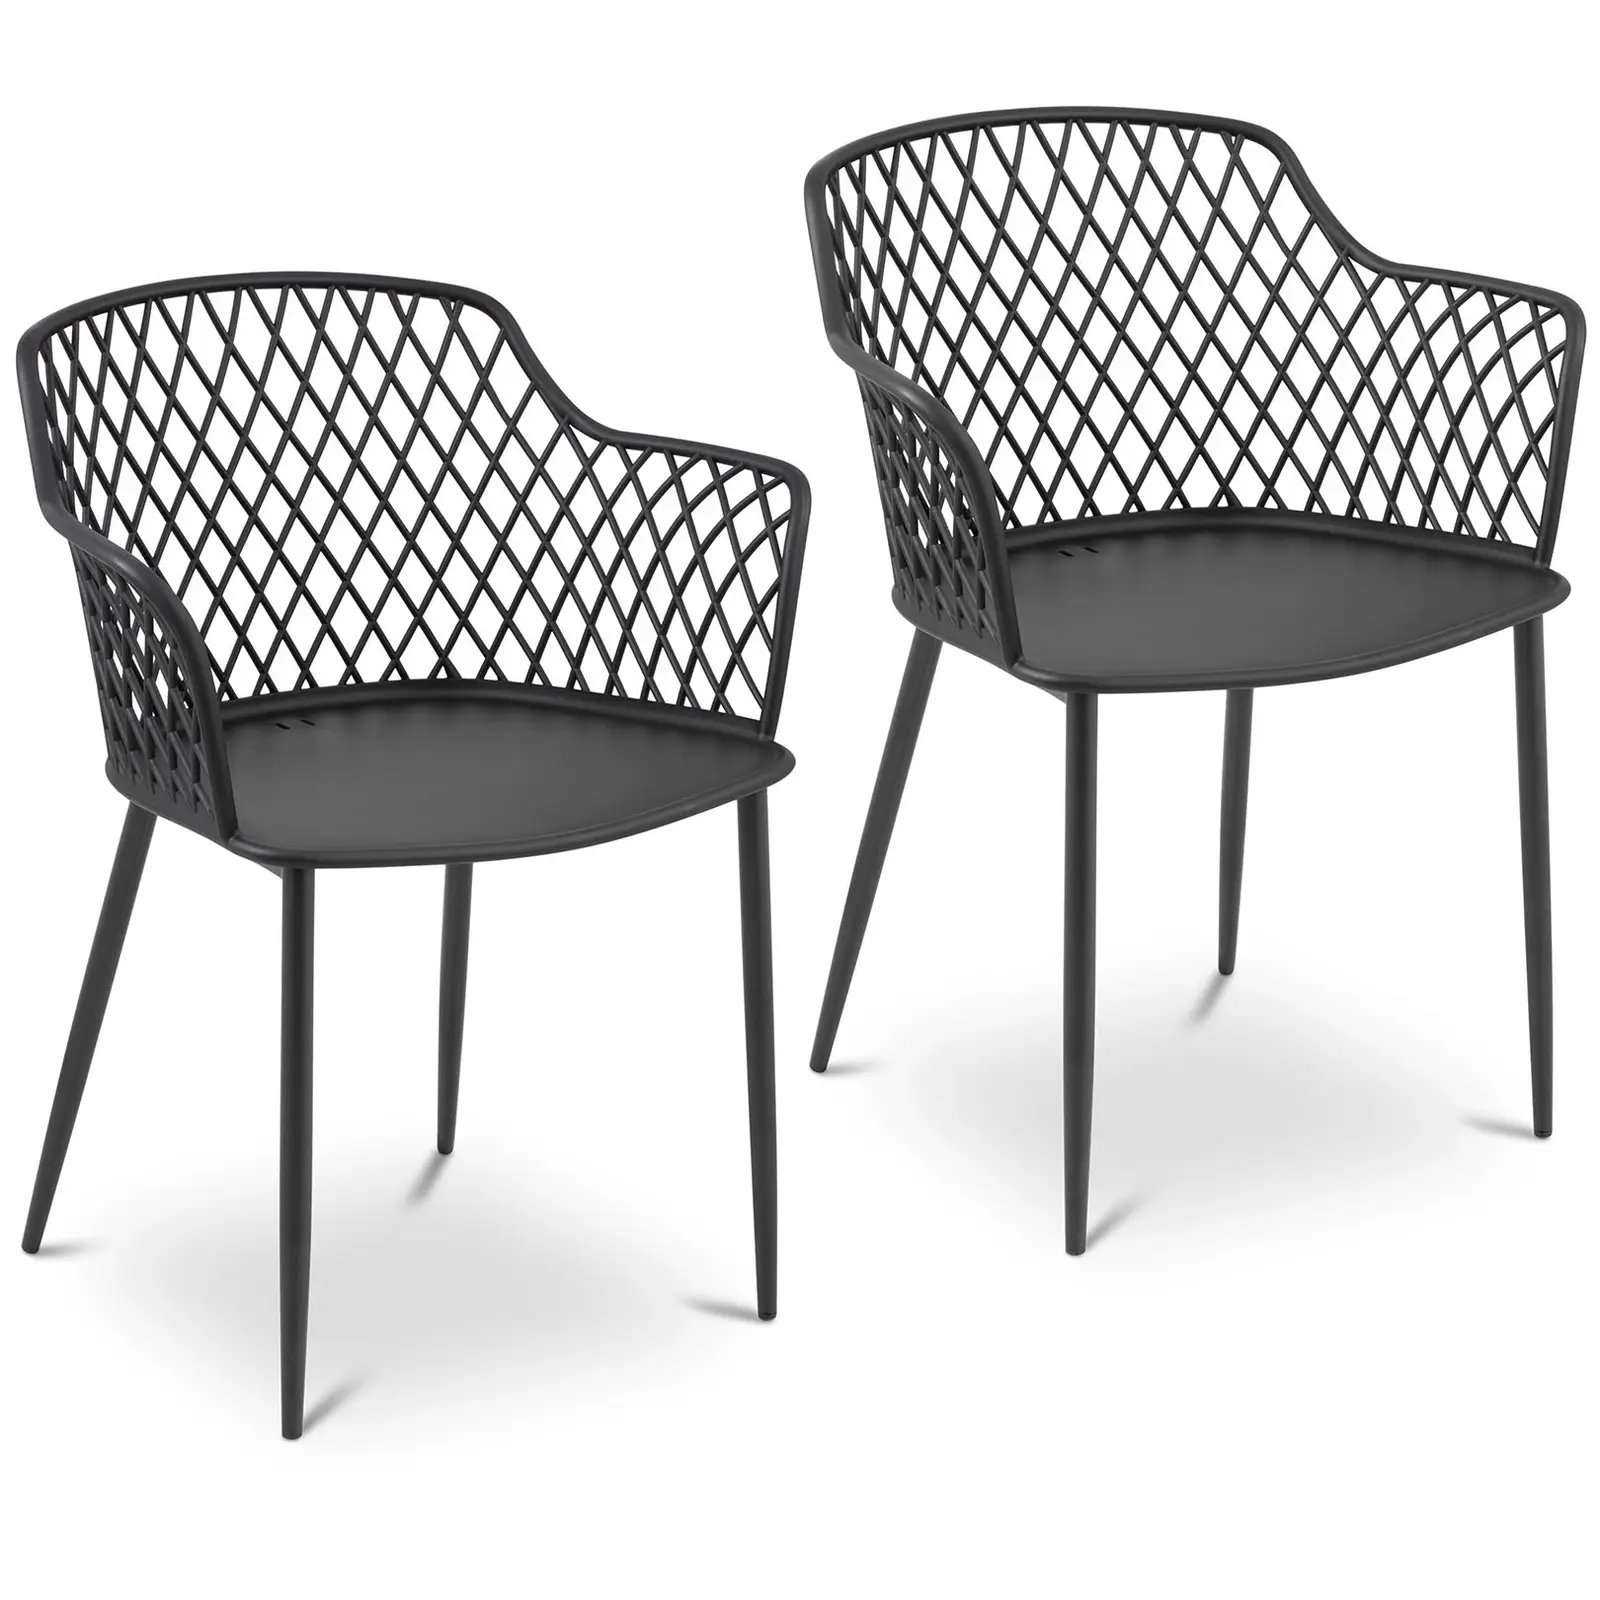 Chair - set of 2 - Royal Catering - up to 150 kg - backrest with diamond pattern - armrests - black